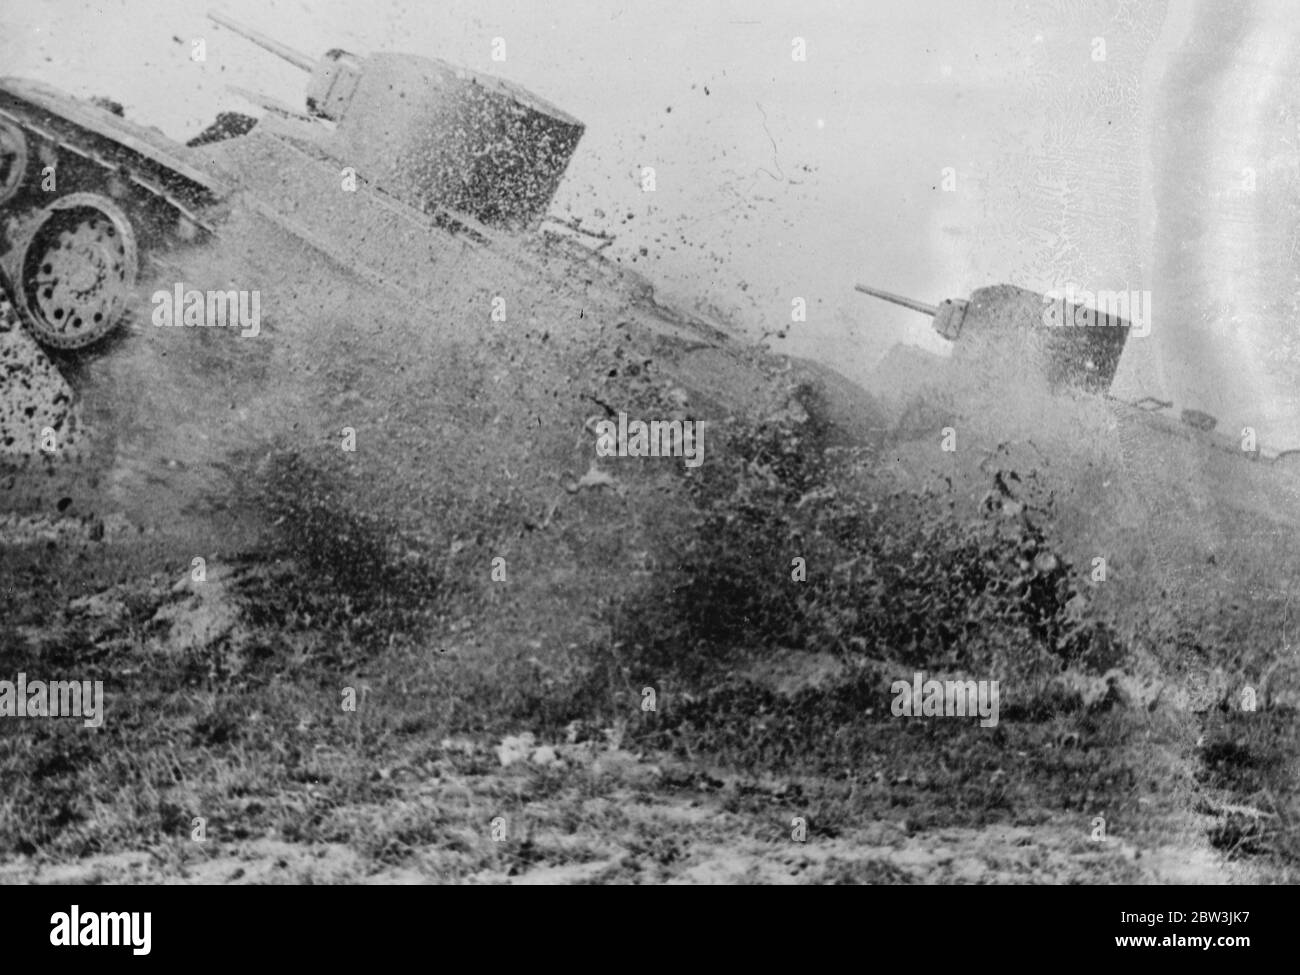 Russia 's dare devil tank corps exercises provide thrills . Tanks almost screened by churned up earth as they climbed over an obstacle . 24 October 1935 Stock Photo